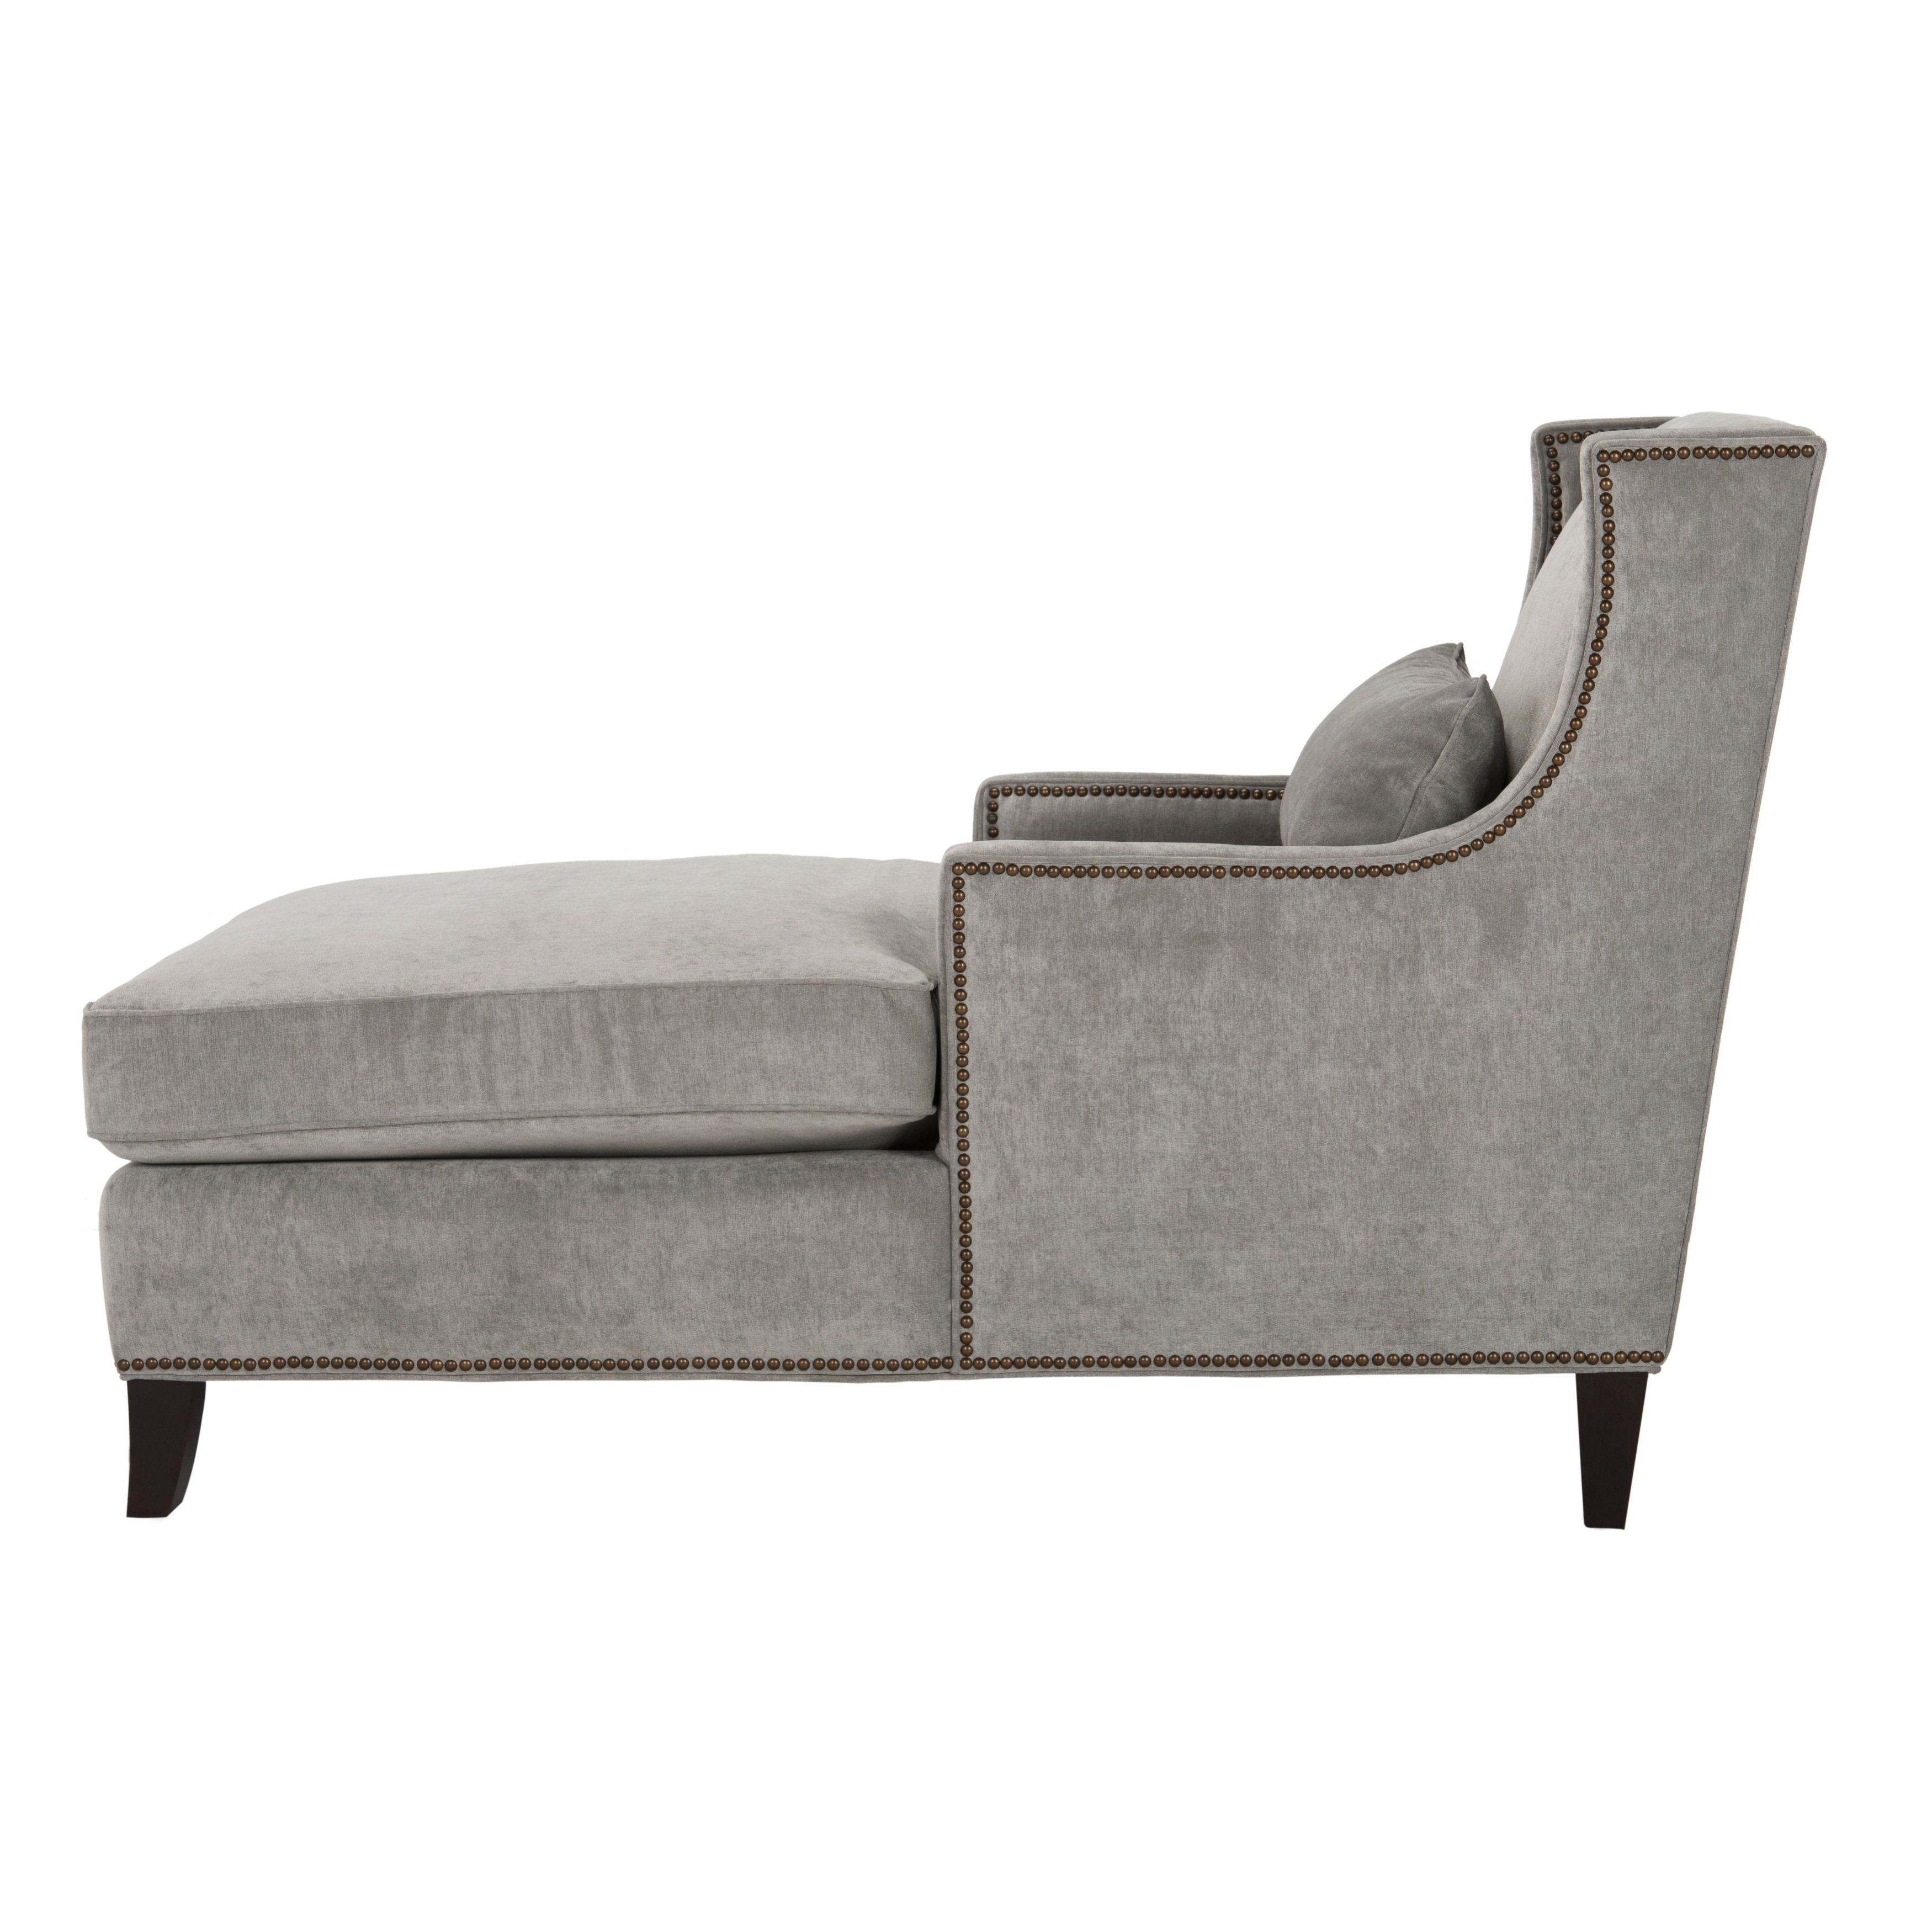 Well Known High End Chaise Lounge Chairs Throughout Safavieh Couture High Line Collection Vitali Grey Velvet Chaise (View 5 of 15)